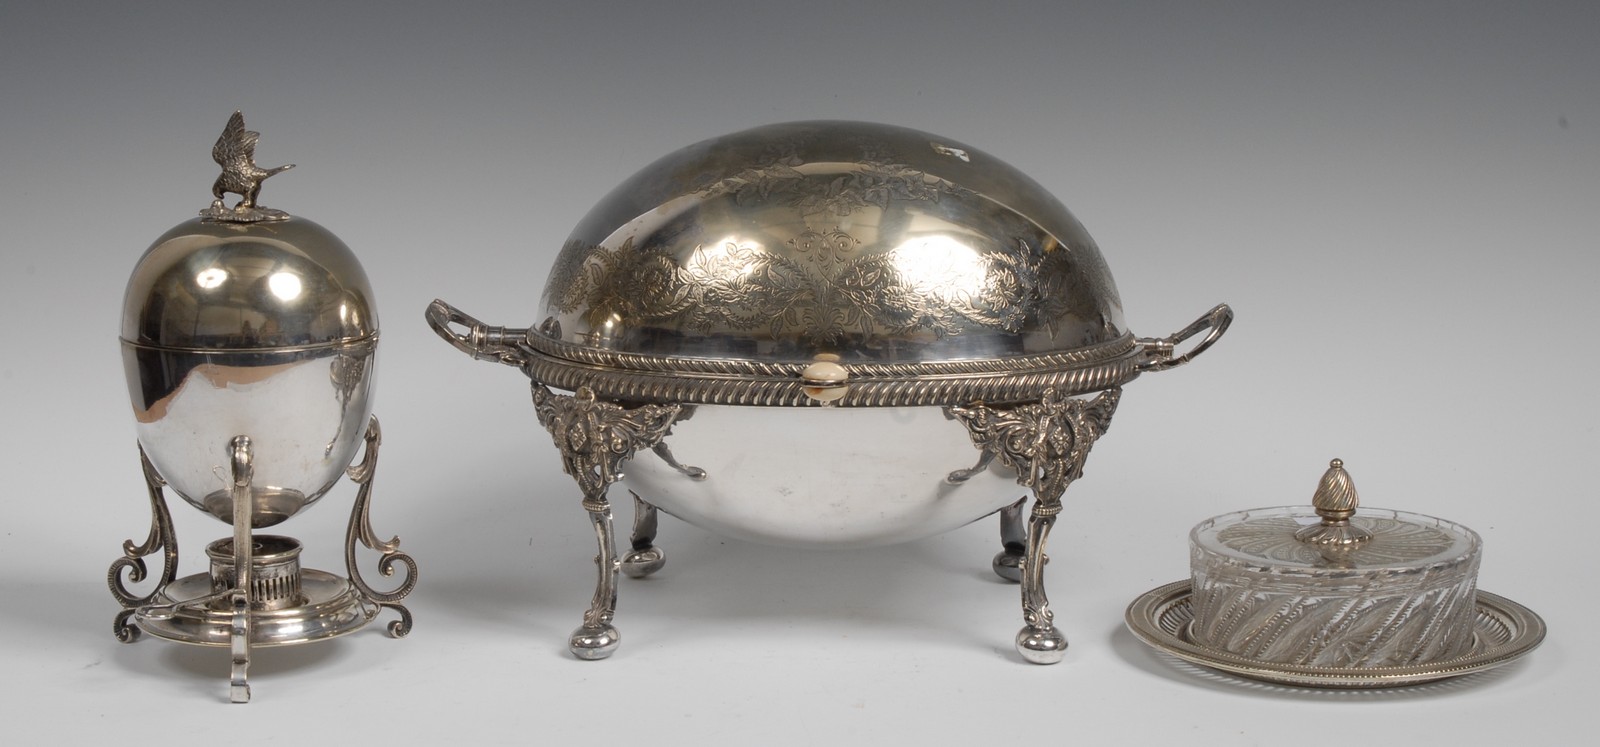 A 19th century breakfast dish, with retractable domed cover, engraved with scrolling foliage,